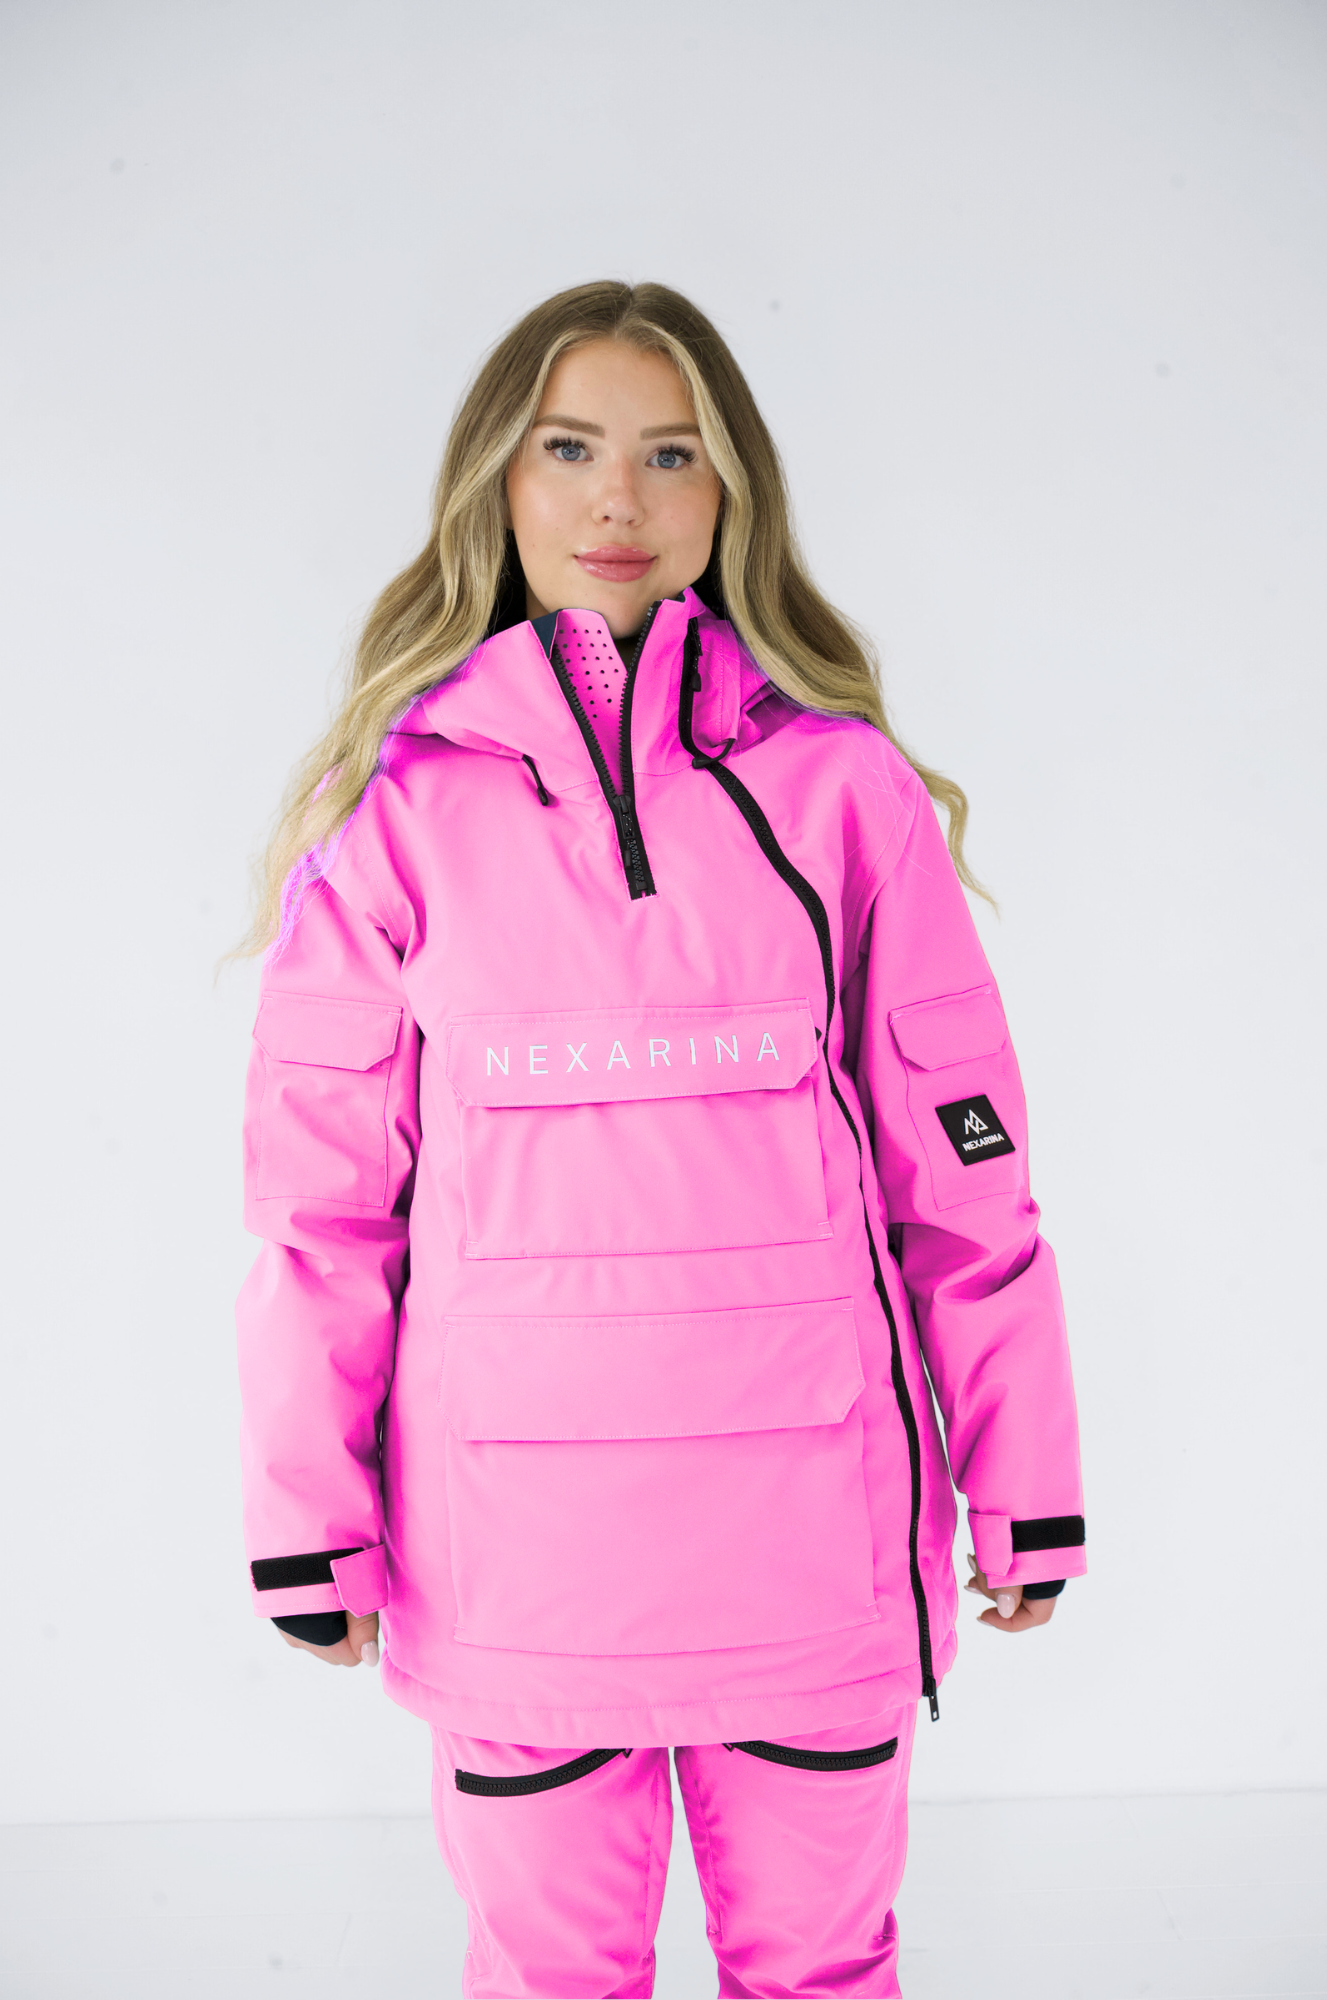 Woman smiling while adjusting hood of pink Nexarina jacket, front view, standing against a white background.